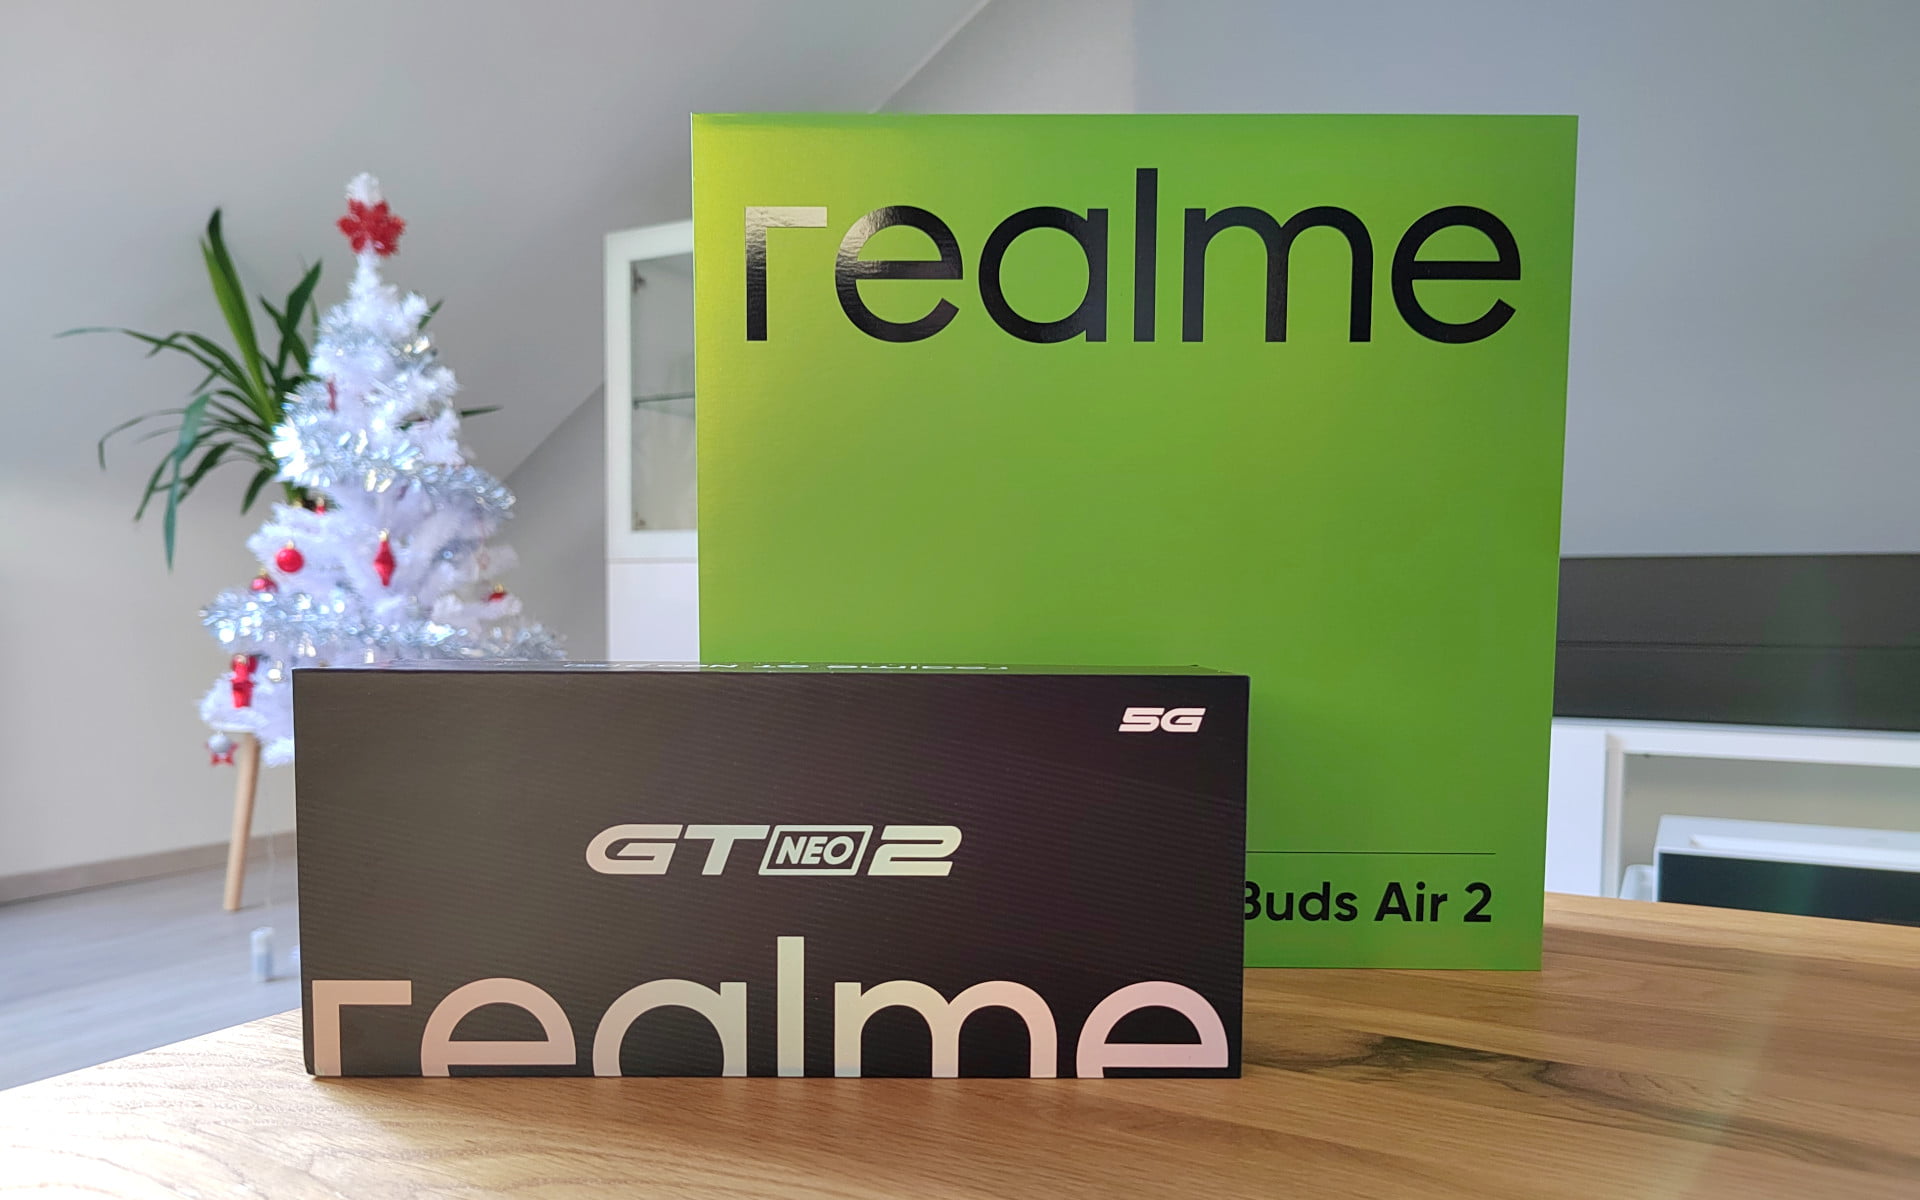 Realme gt neo камера